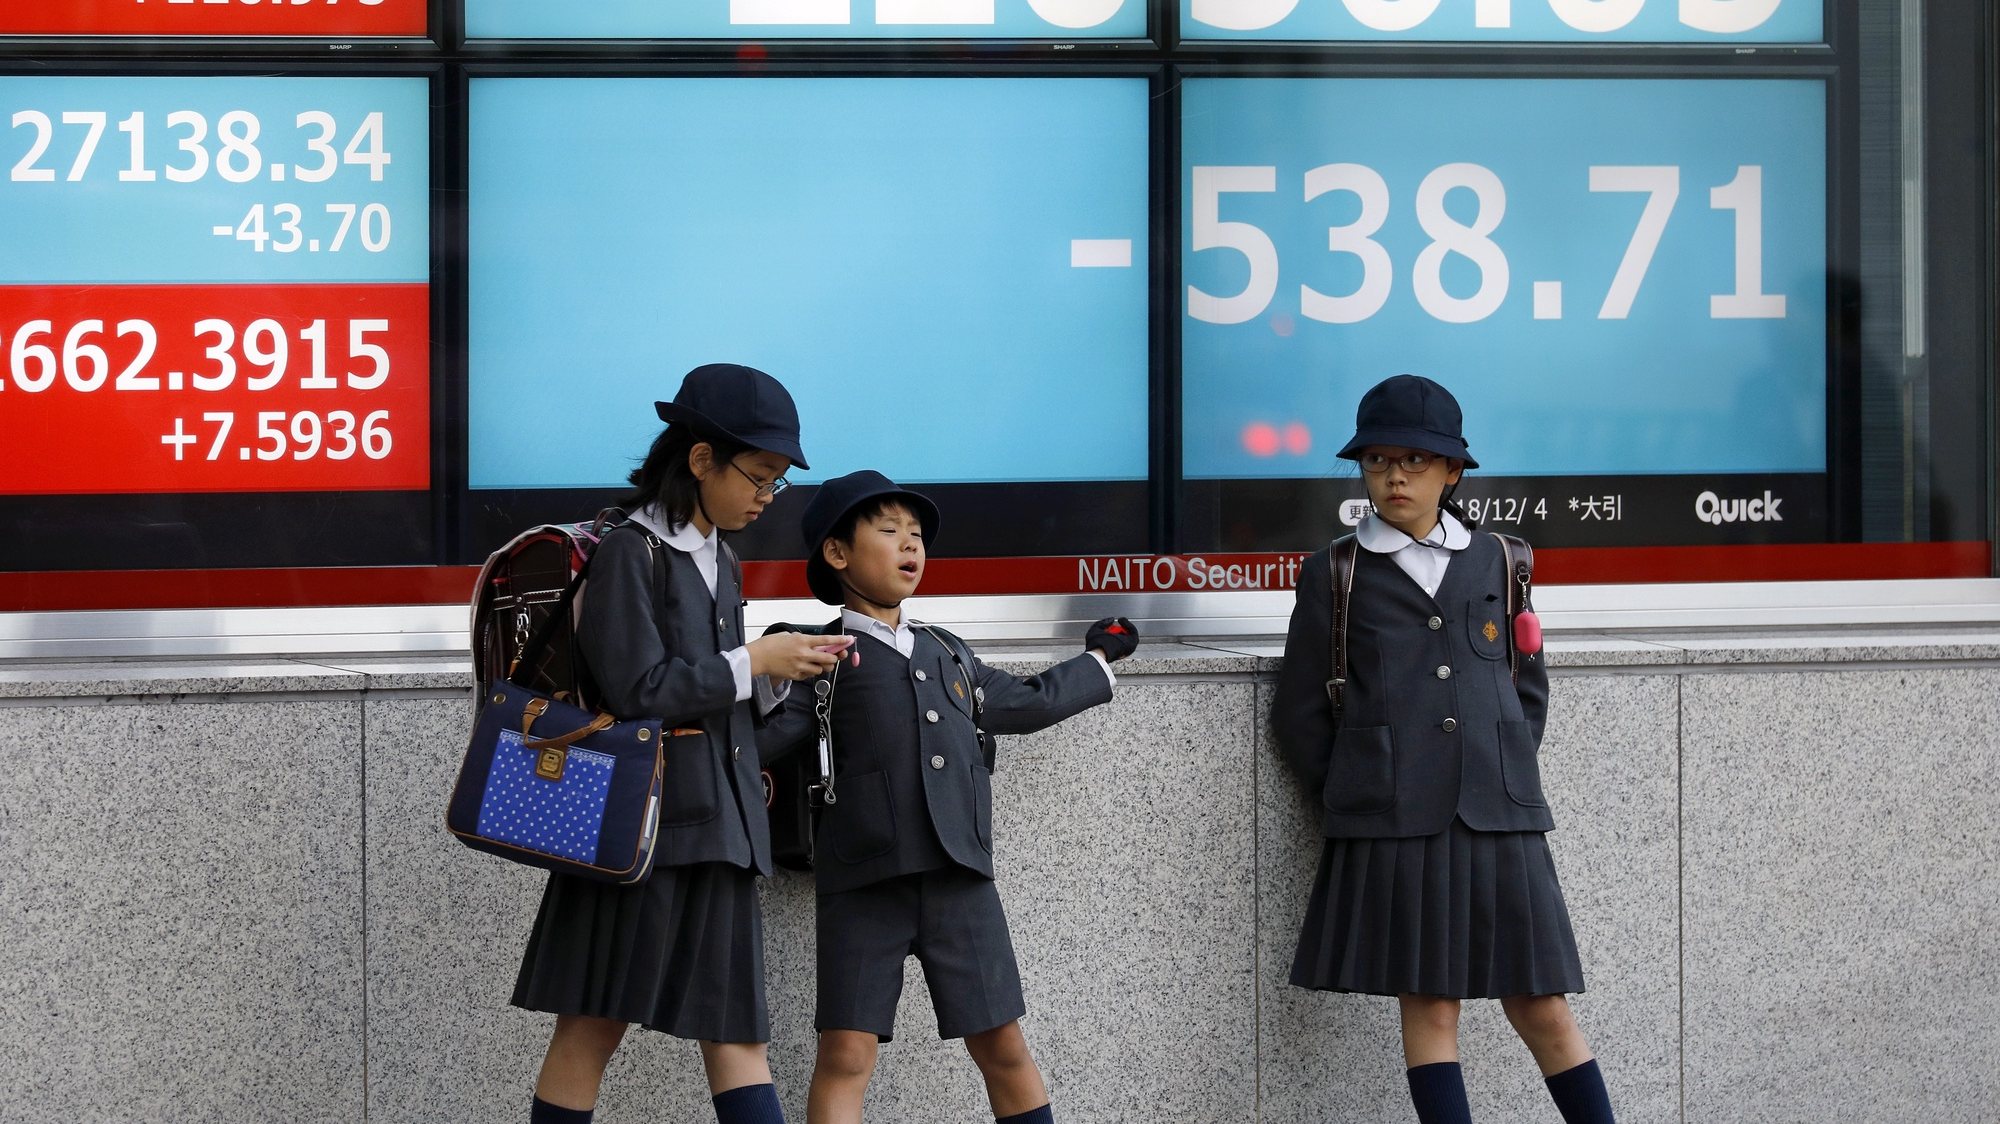 epa07207500 School children stand before a stock market indicator board in Tokyo, Japan, 04 December 2018. Tokyo stocks fell sharply following a stronger yen against the USD and profit-taking. The Nikkei 225 index dropped 538.71 points, or 2.39 percent, to to close at 22,036.05.  EPA/FRANCK ROBICHON